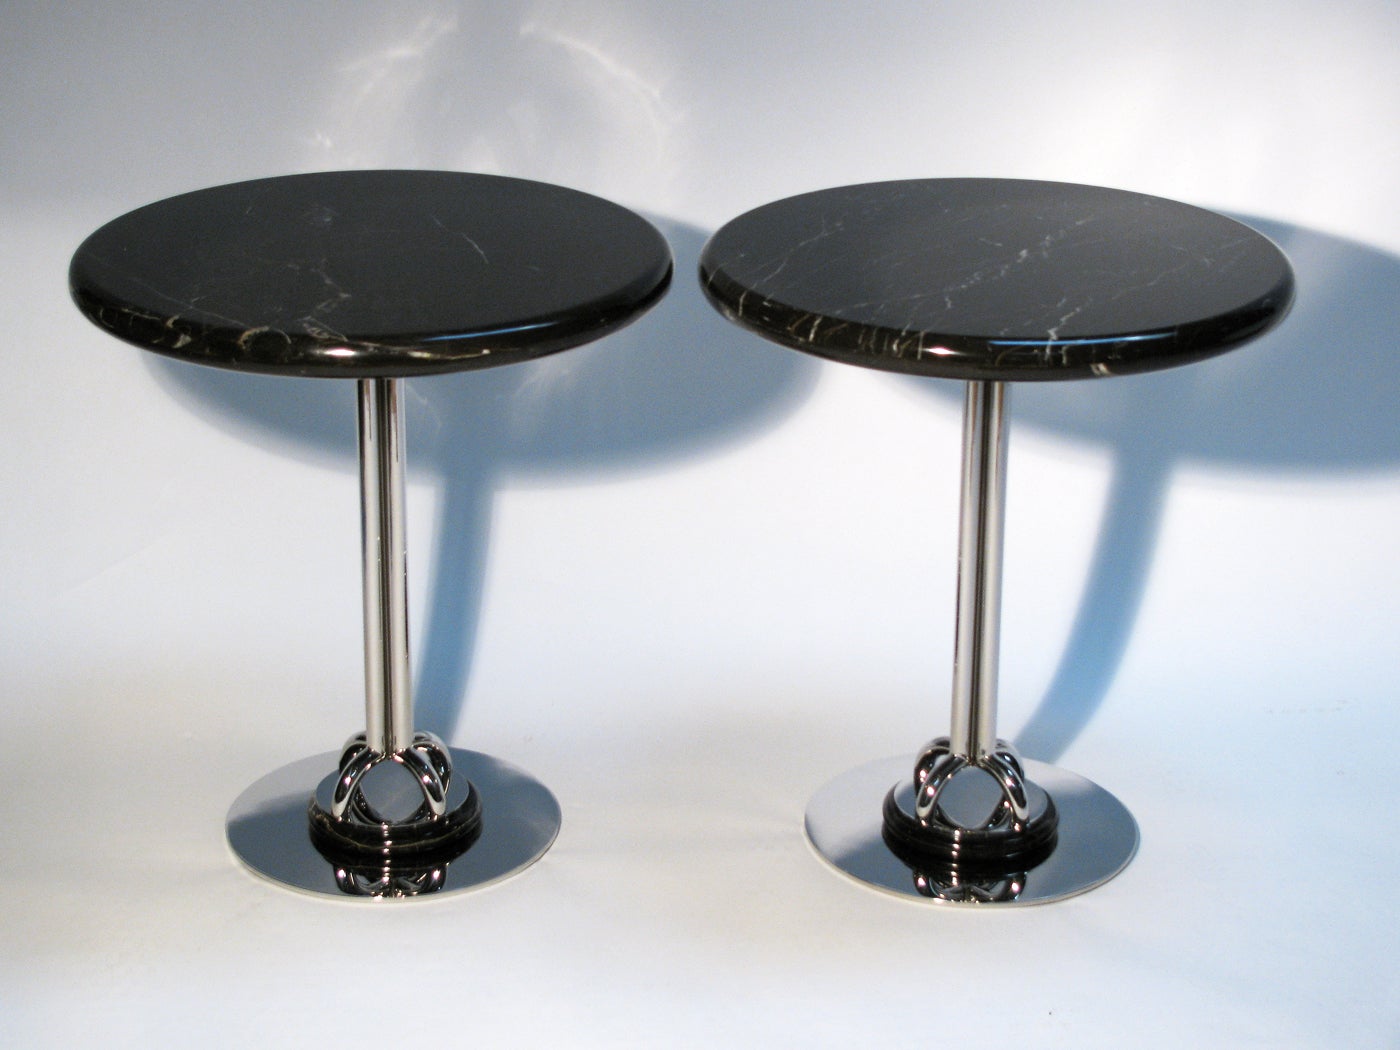 A Pair of Nicos Zographos Drinks/ Side Tables